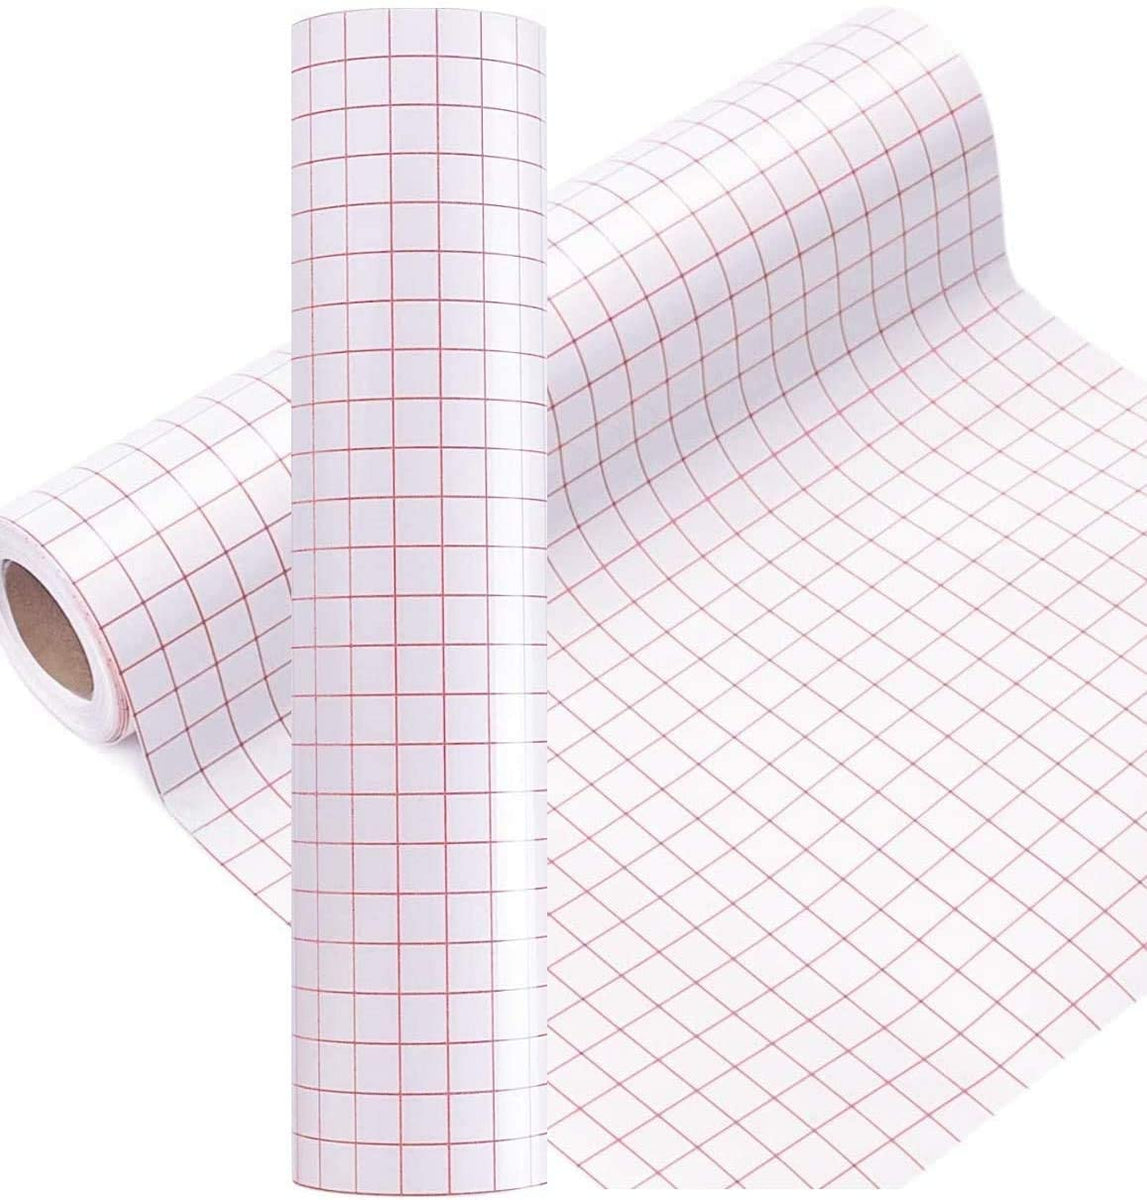 Vinyl Transfer Paper Tape Roll Transfer Tape Vinyl 50 Feet Clear Contact  Paper 12 Roll Paper Transfer Tape for Vinyl Wood and Heat Transfer HTV  with Grid